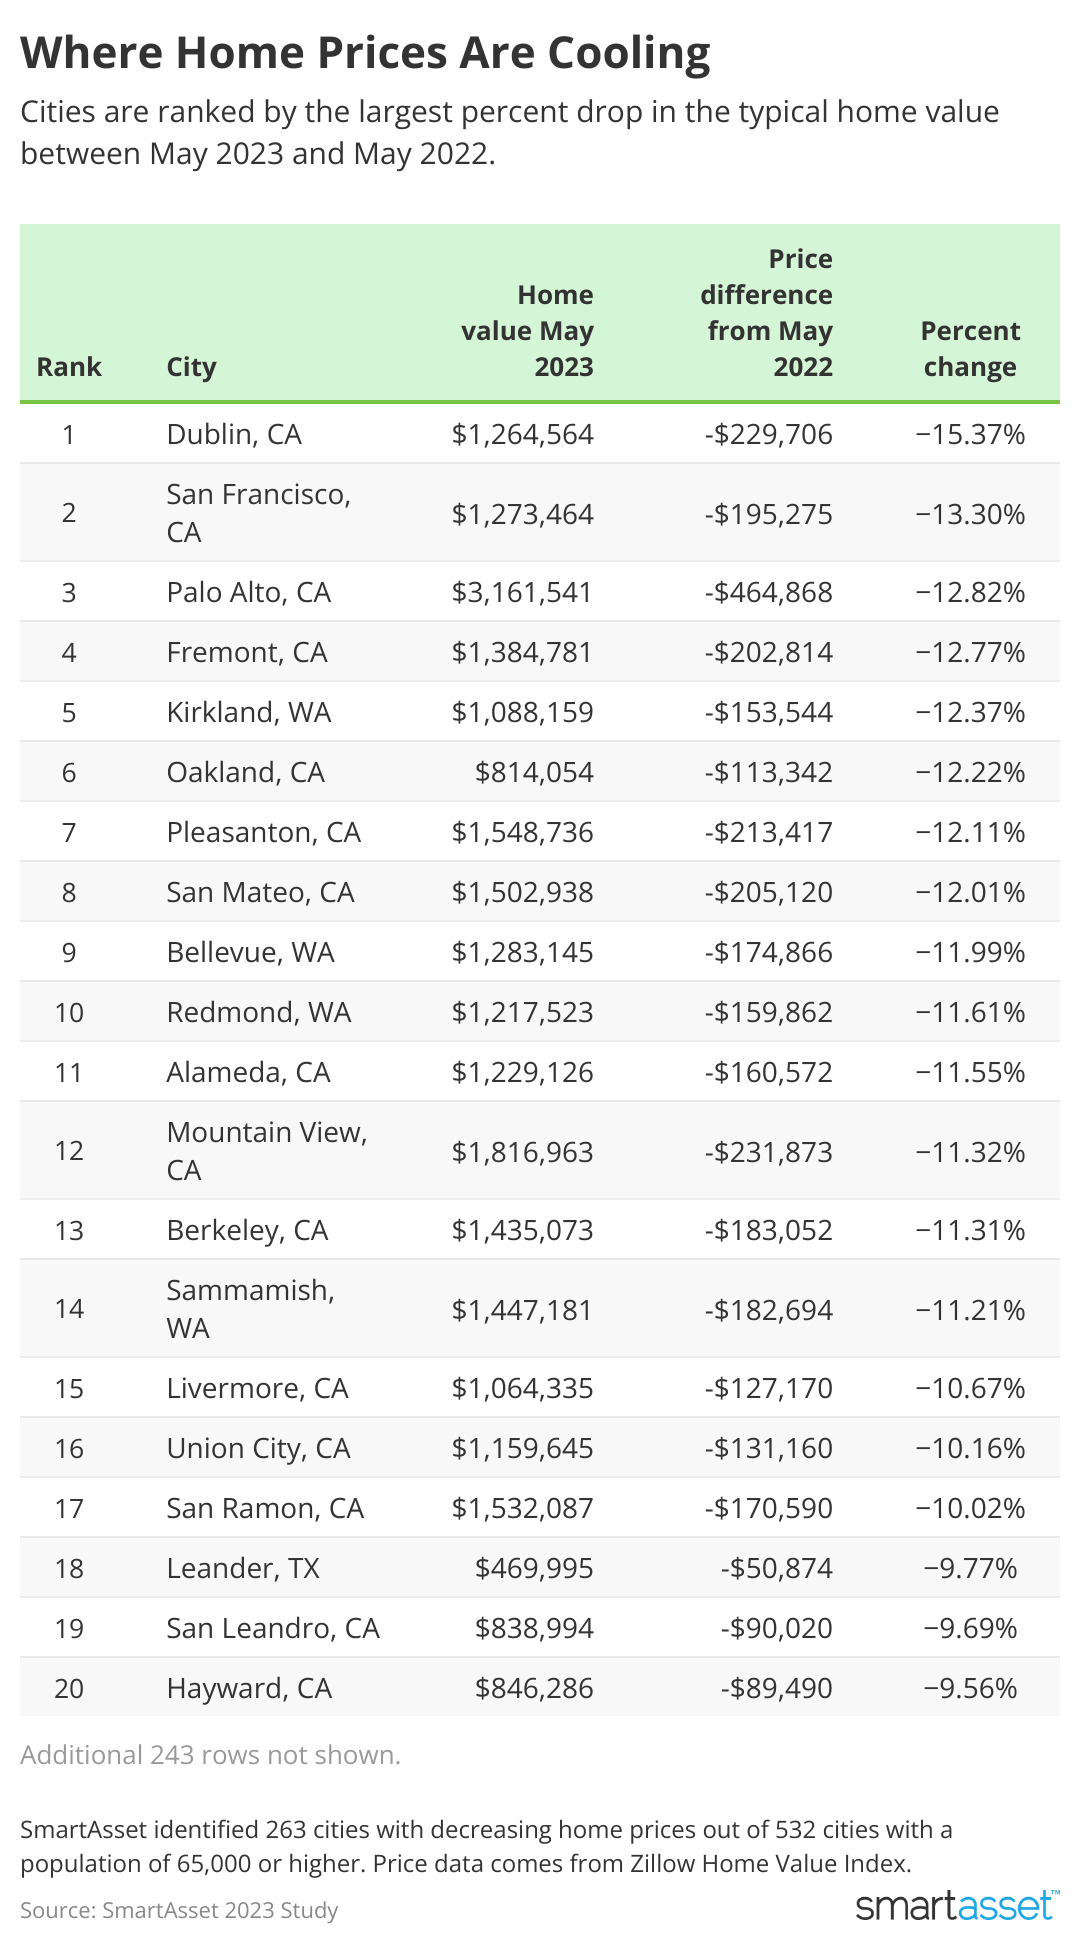 A table listing 20 cities where home prices are cooling, with metrics about those cities’ housing markets.